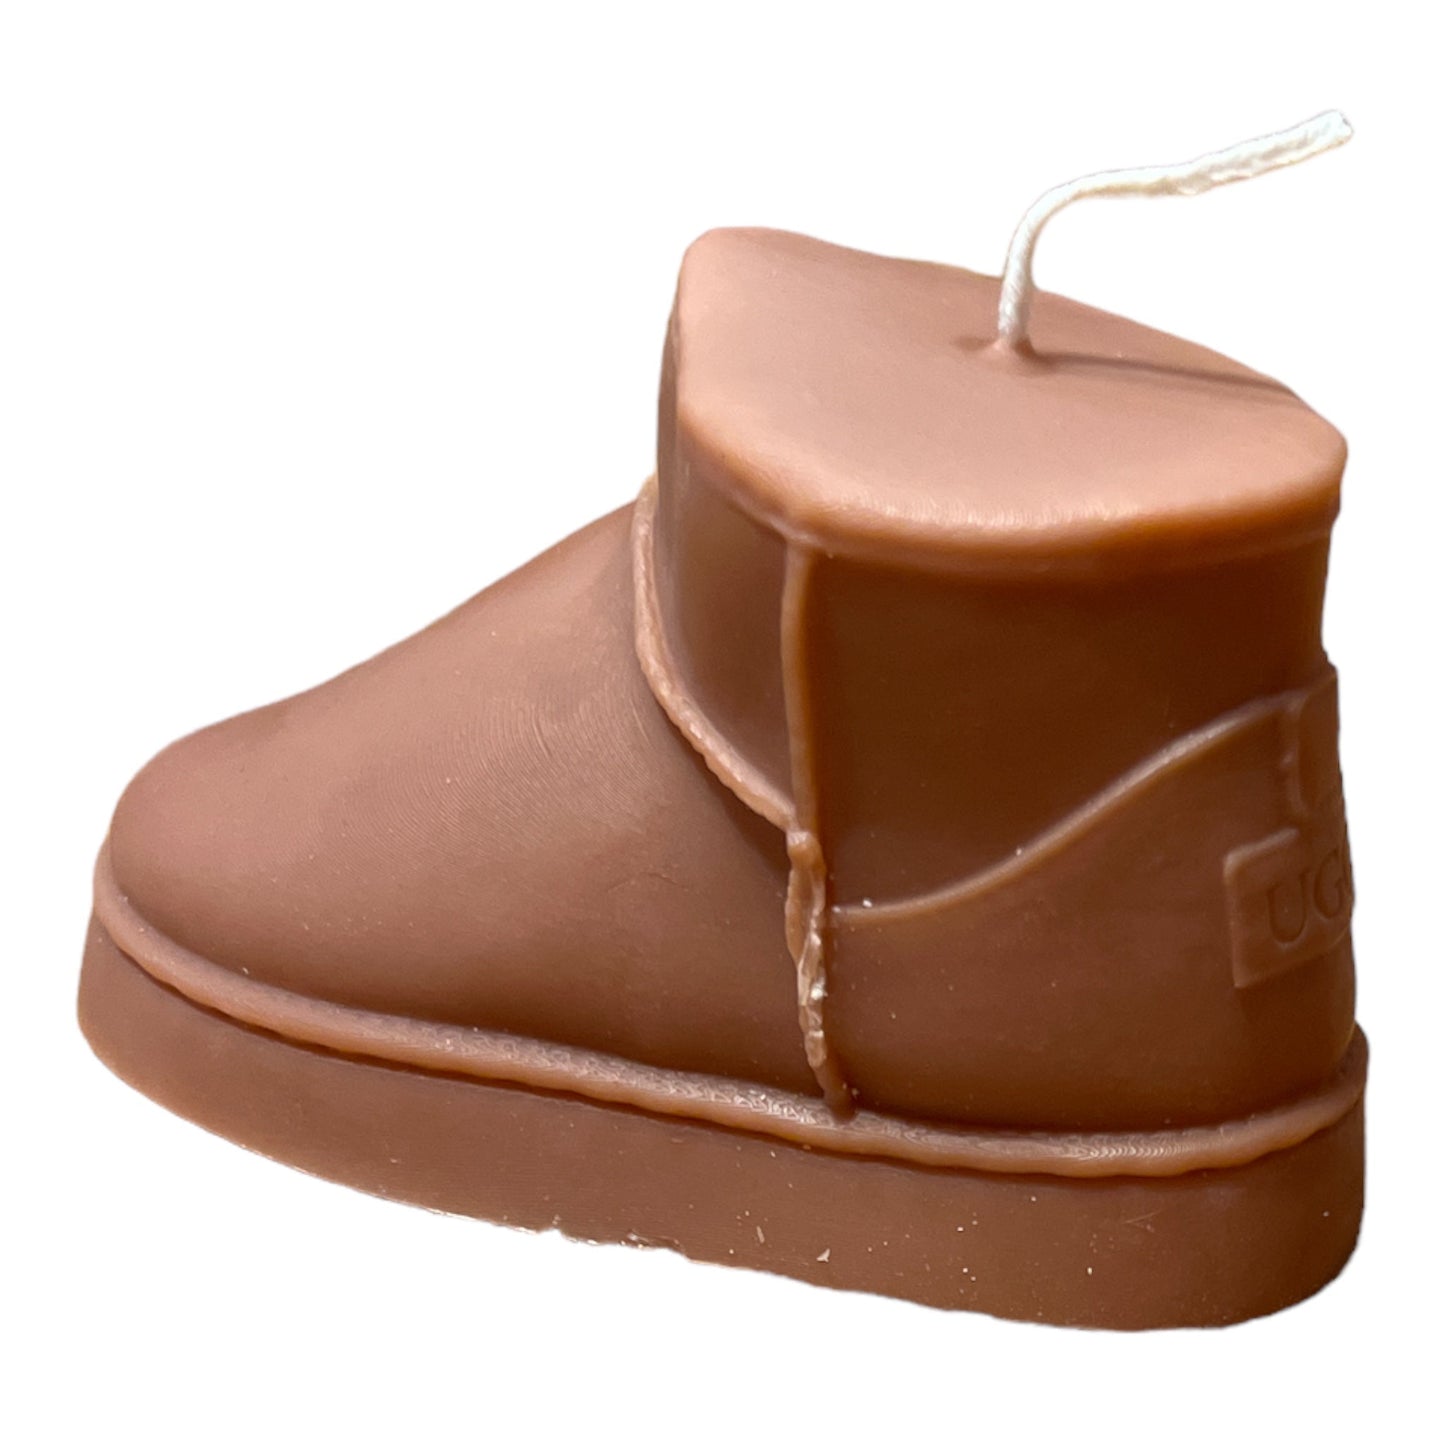 comfy boot: Nude tones / Unscented - Something about Sofia